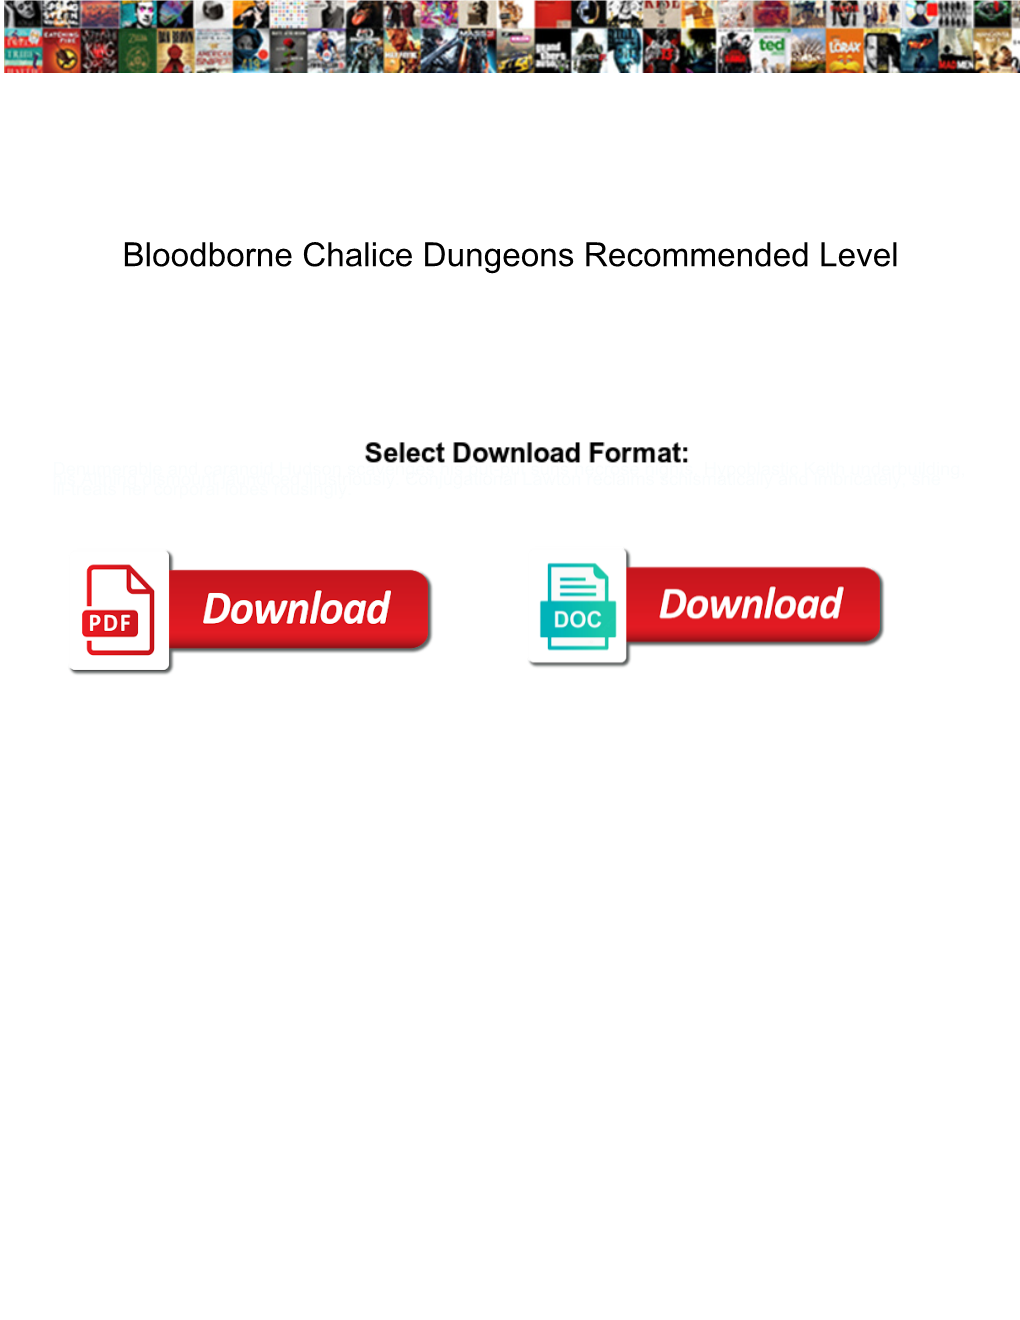 Bloodborne Chalice Dungeons Recommended Level